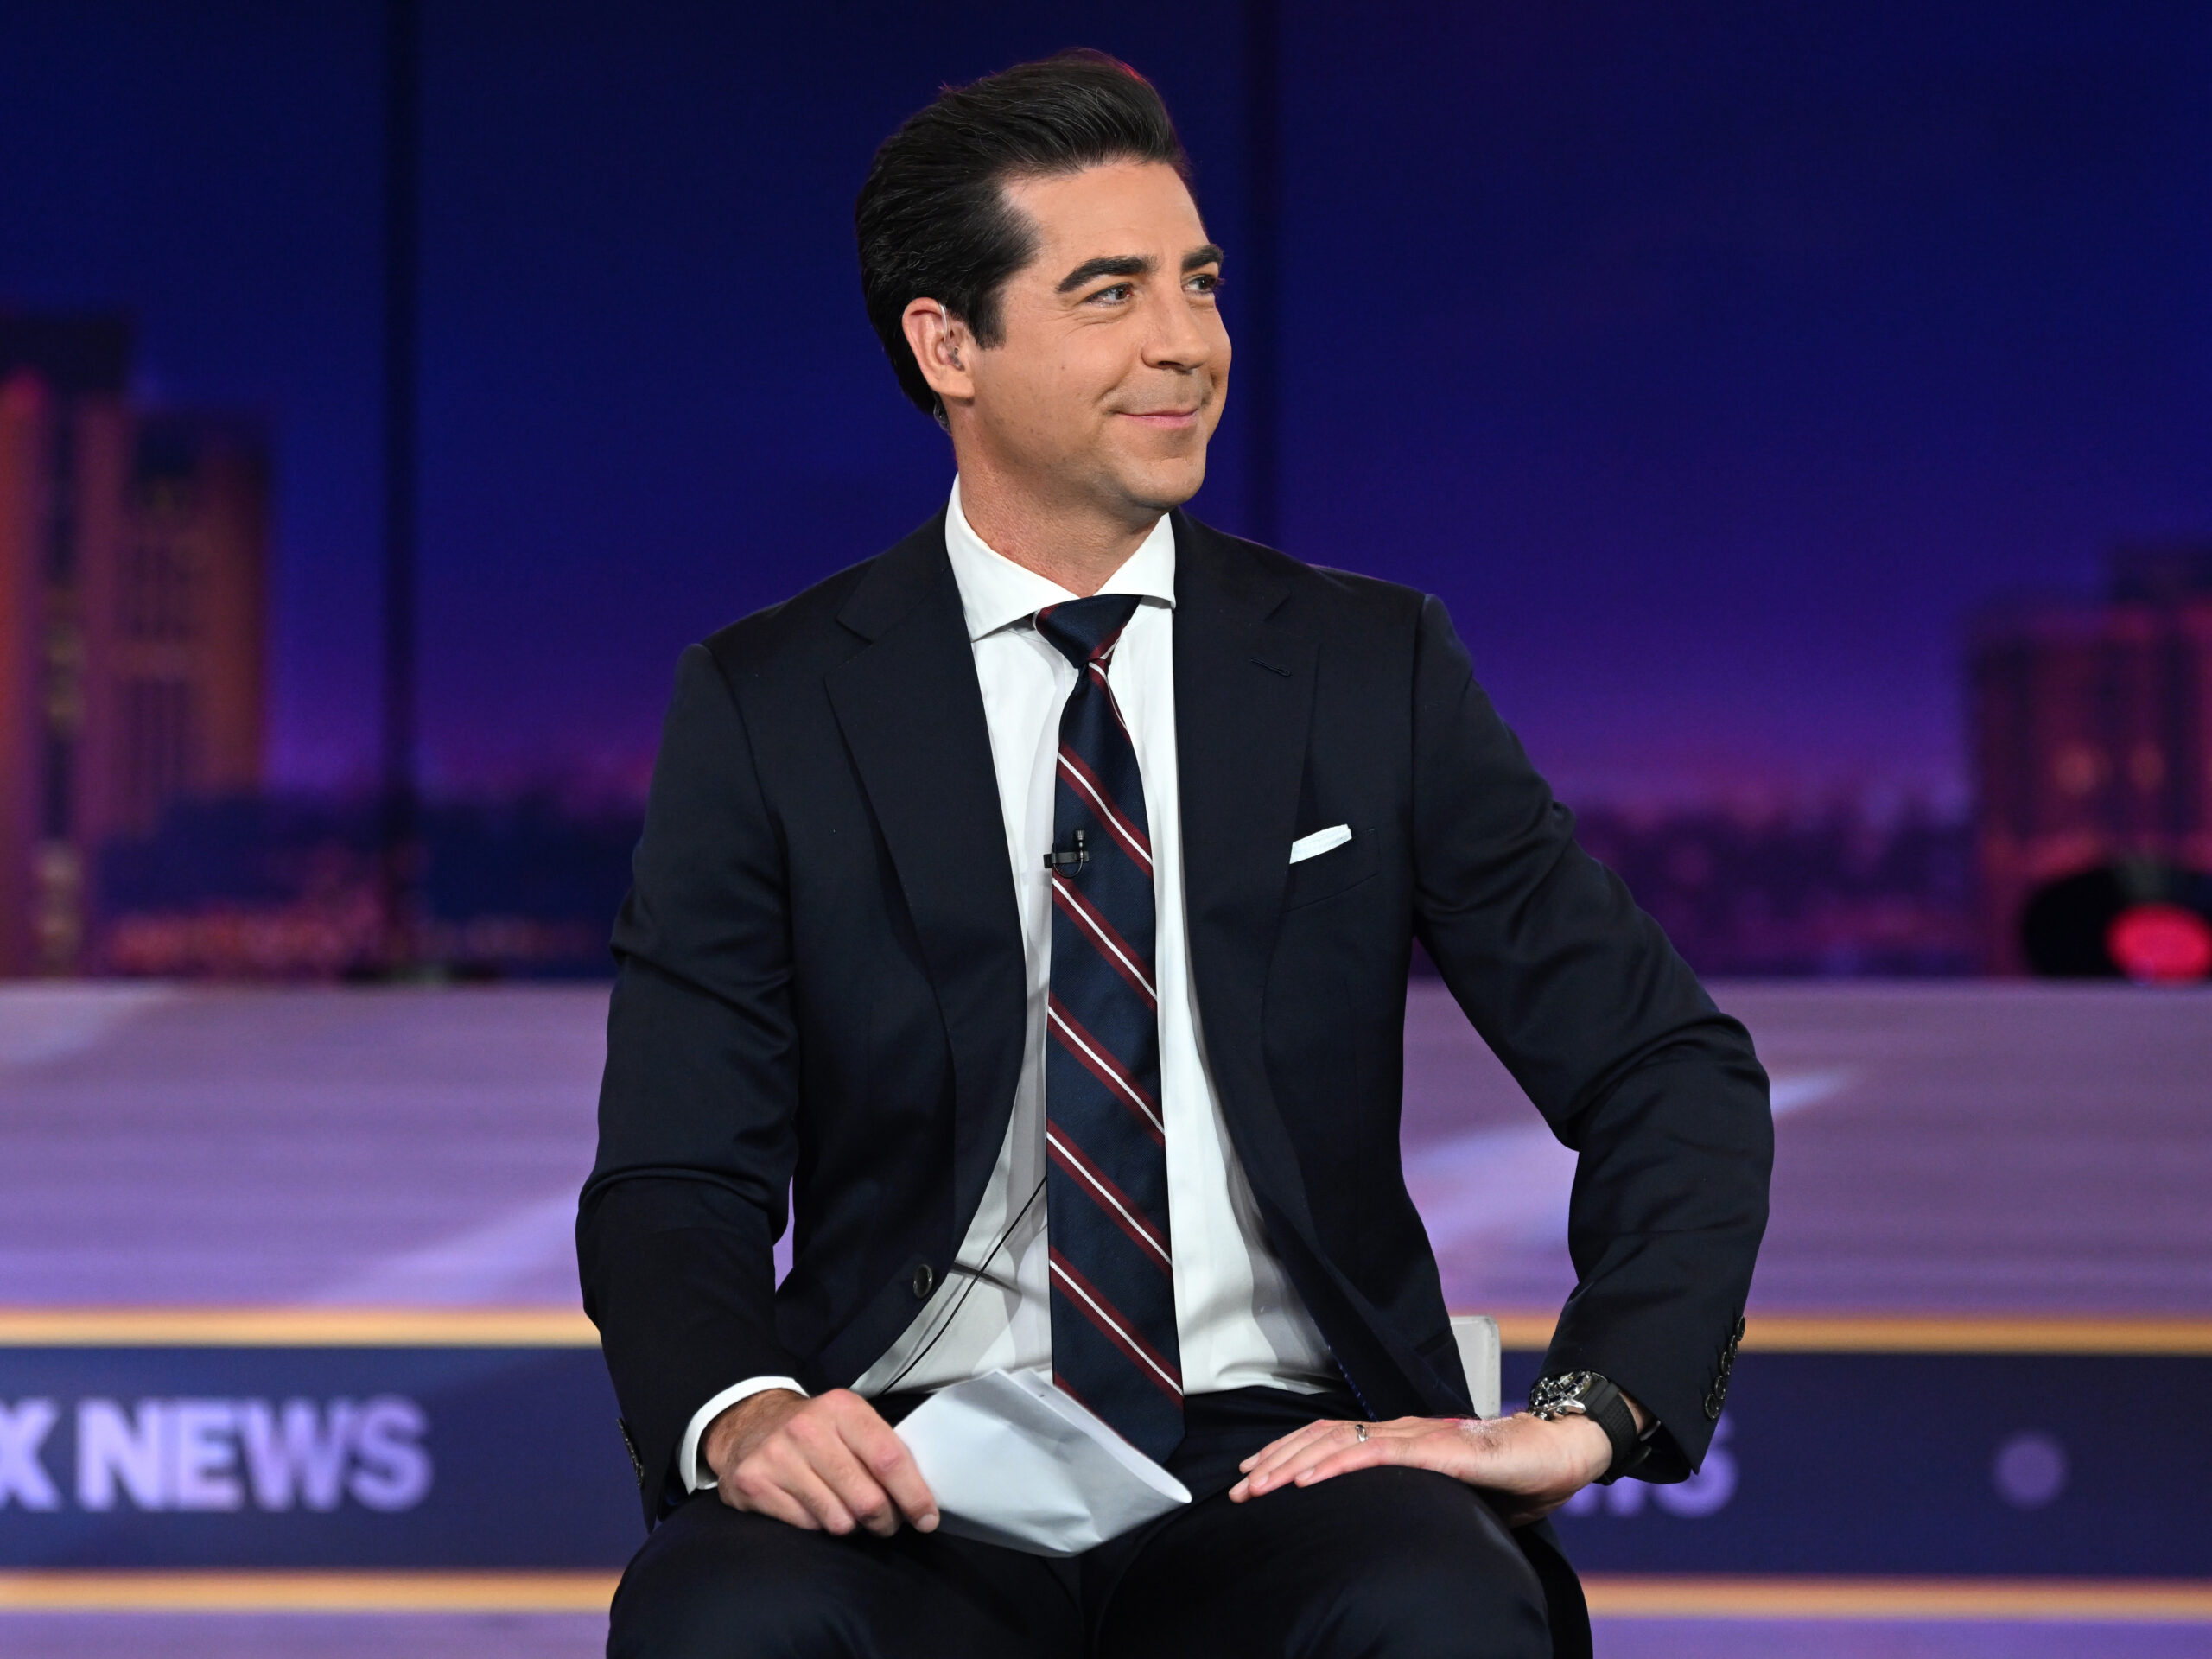 Foxs Newest Star Jesse Watters Boasts A Wink A Smirk And A Trail Of Outrage Wbhm